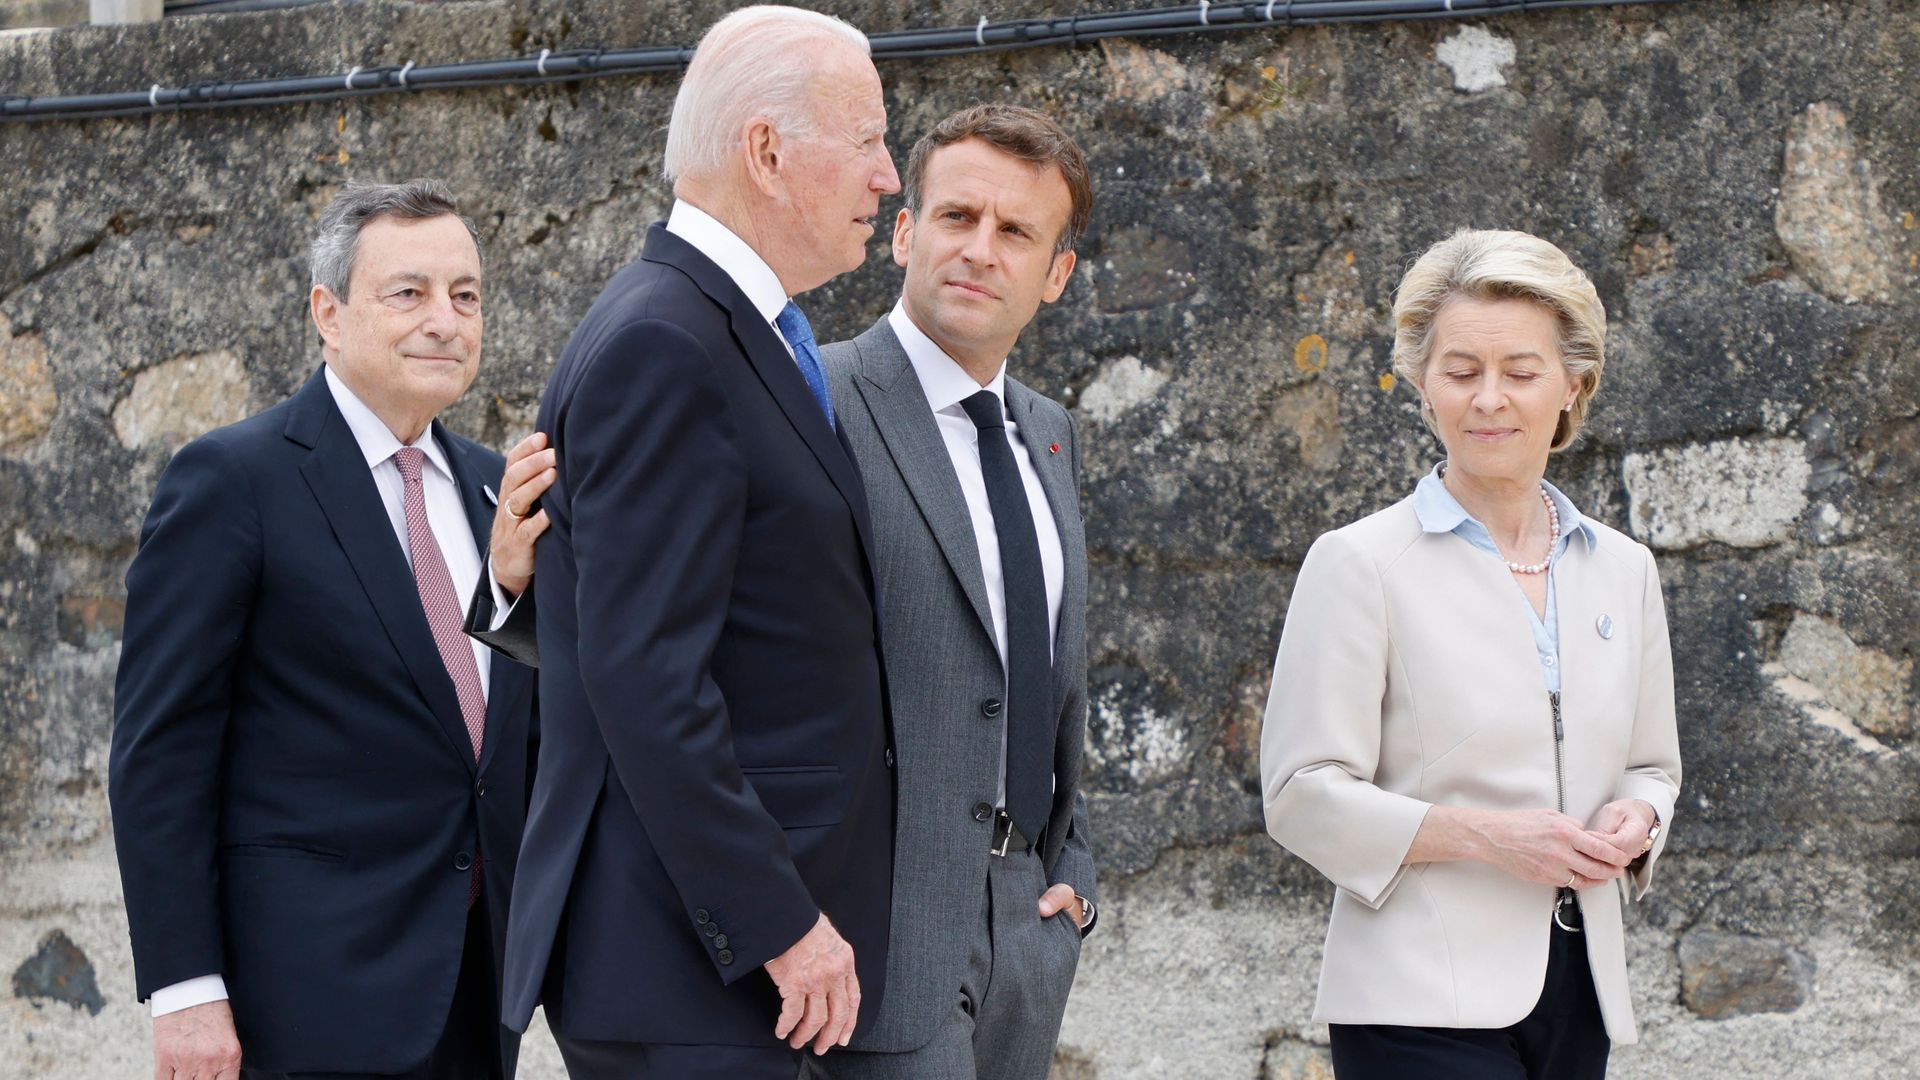 US President Joe Biden (L) and France's President Emmanuel Macron speak after the family photo at the start of the G7 summit in Carbis Bay, Cornwall on June 11, 2021.